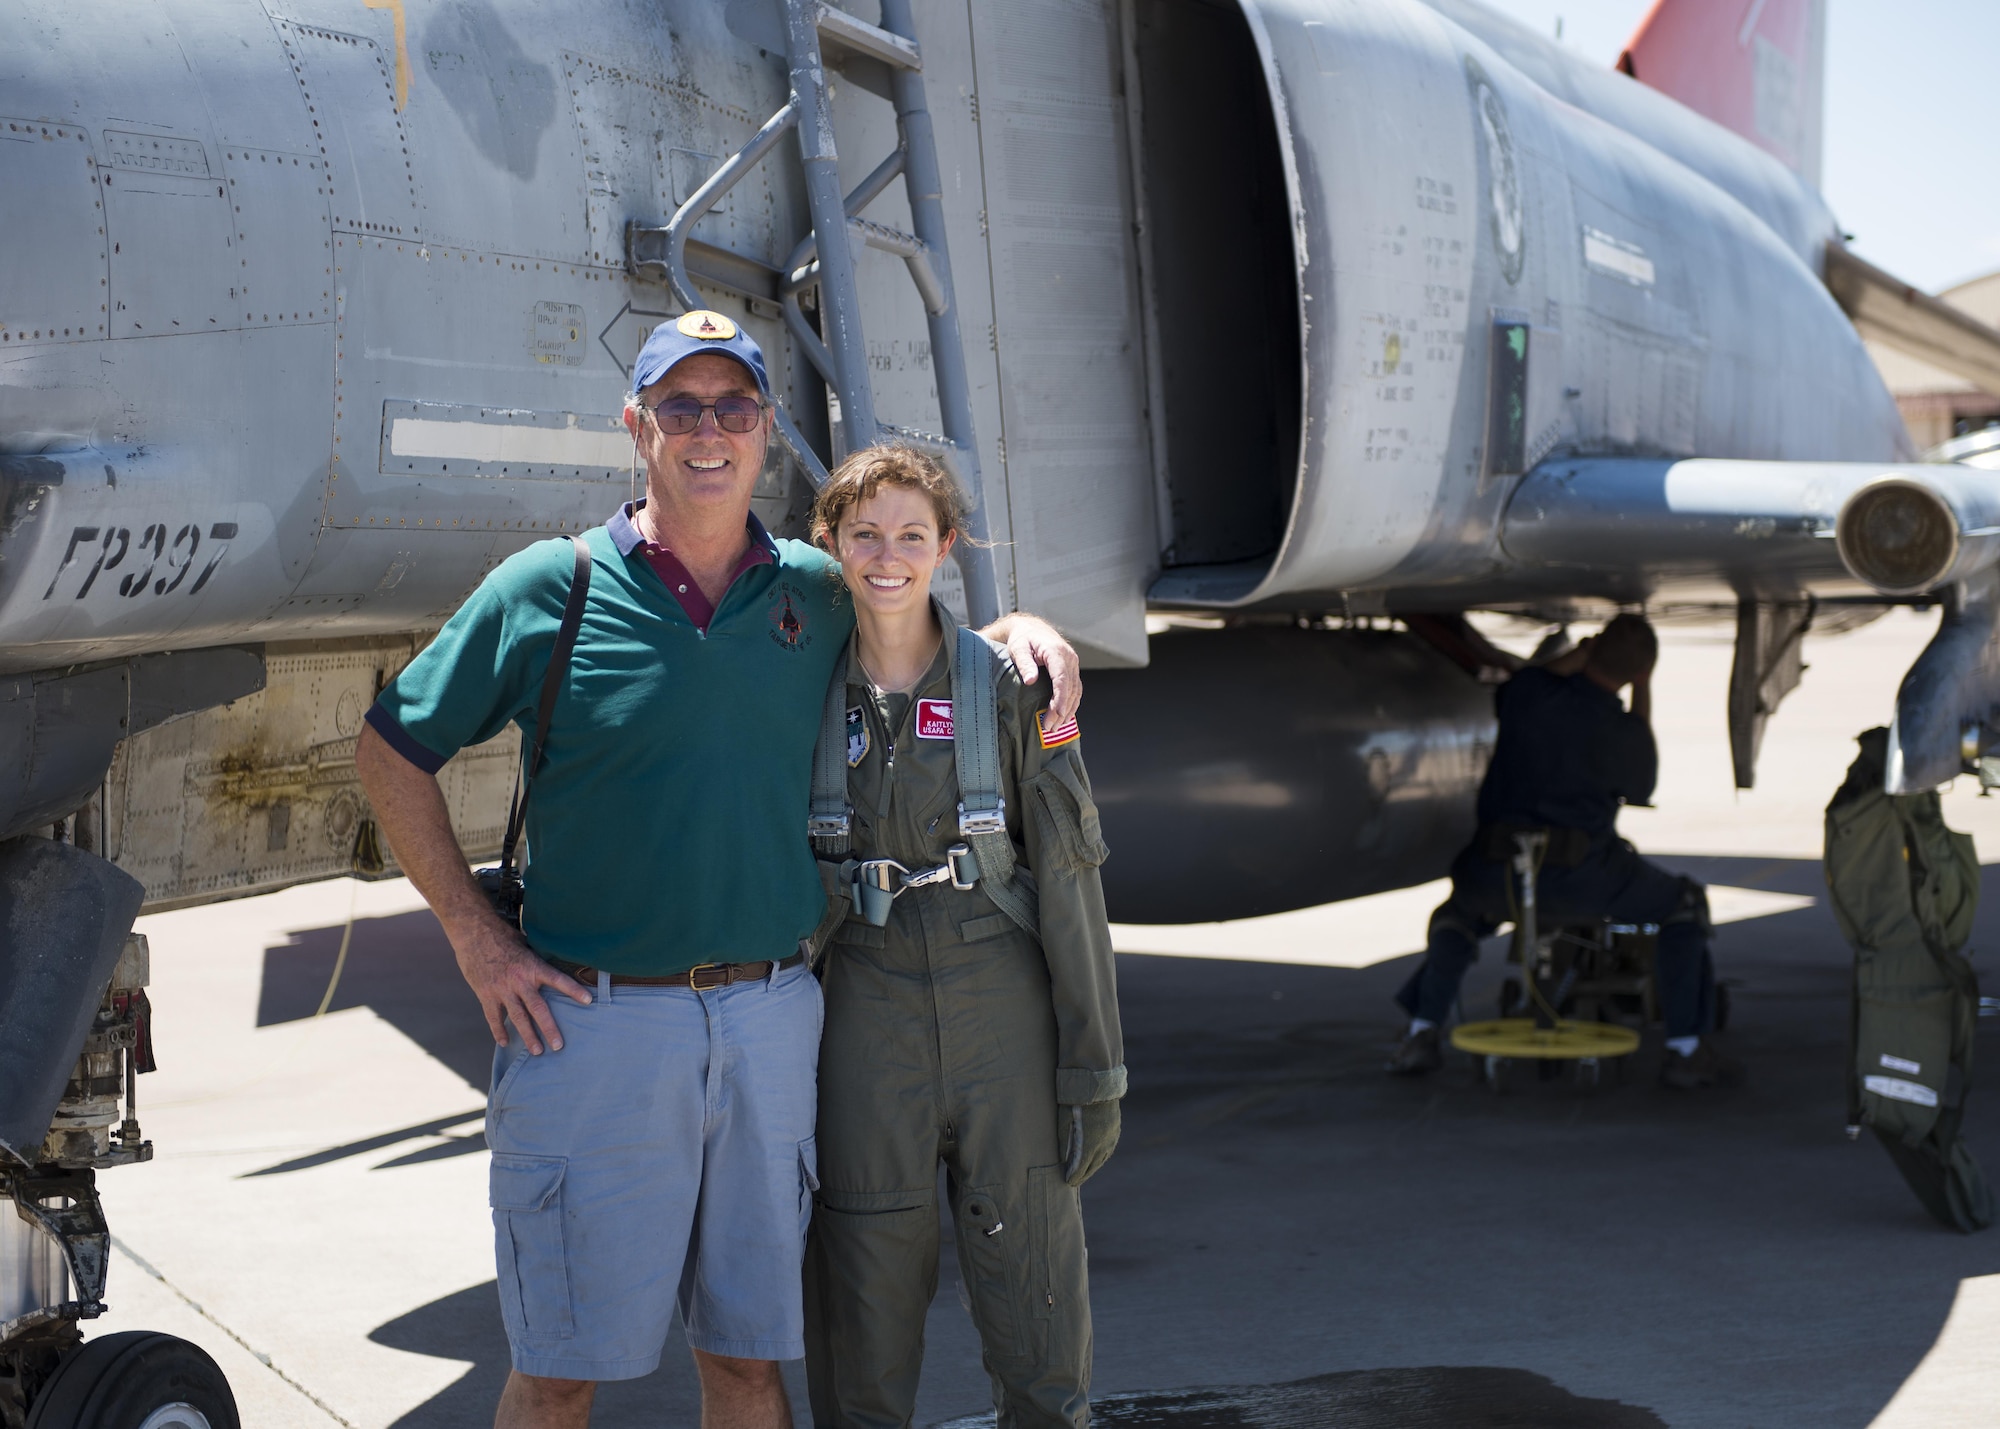 Retired Col. David and his daughter, Cadet 2nd Class Kaitlyn, stand next to an F-4 Phantom on July 12, 2016 at Holloman Air Force Base, N.M. Kaitlyn flew with Lt. Col. Ronald King, the commander of Detachment 1, the same detachment her father commanded from 1992-1994. (Last names are being withheld due to operational requirements. U.S. Air Force photo by Airman 1st Class Randahl J. Jenson) 